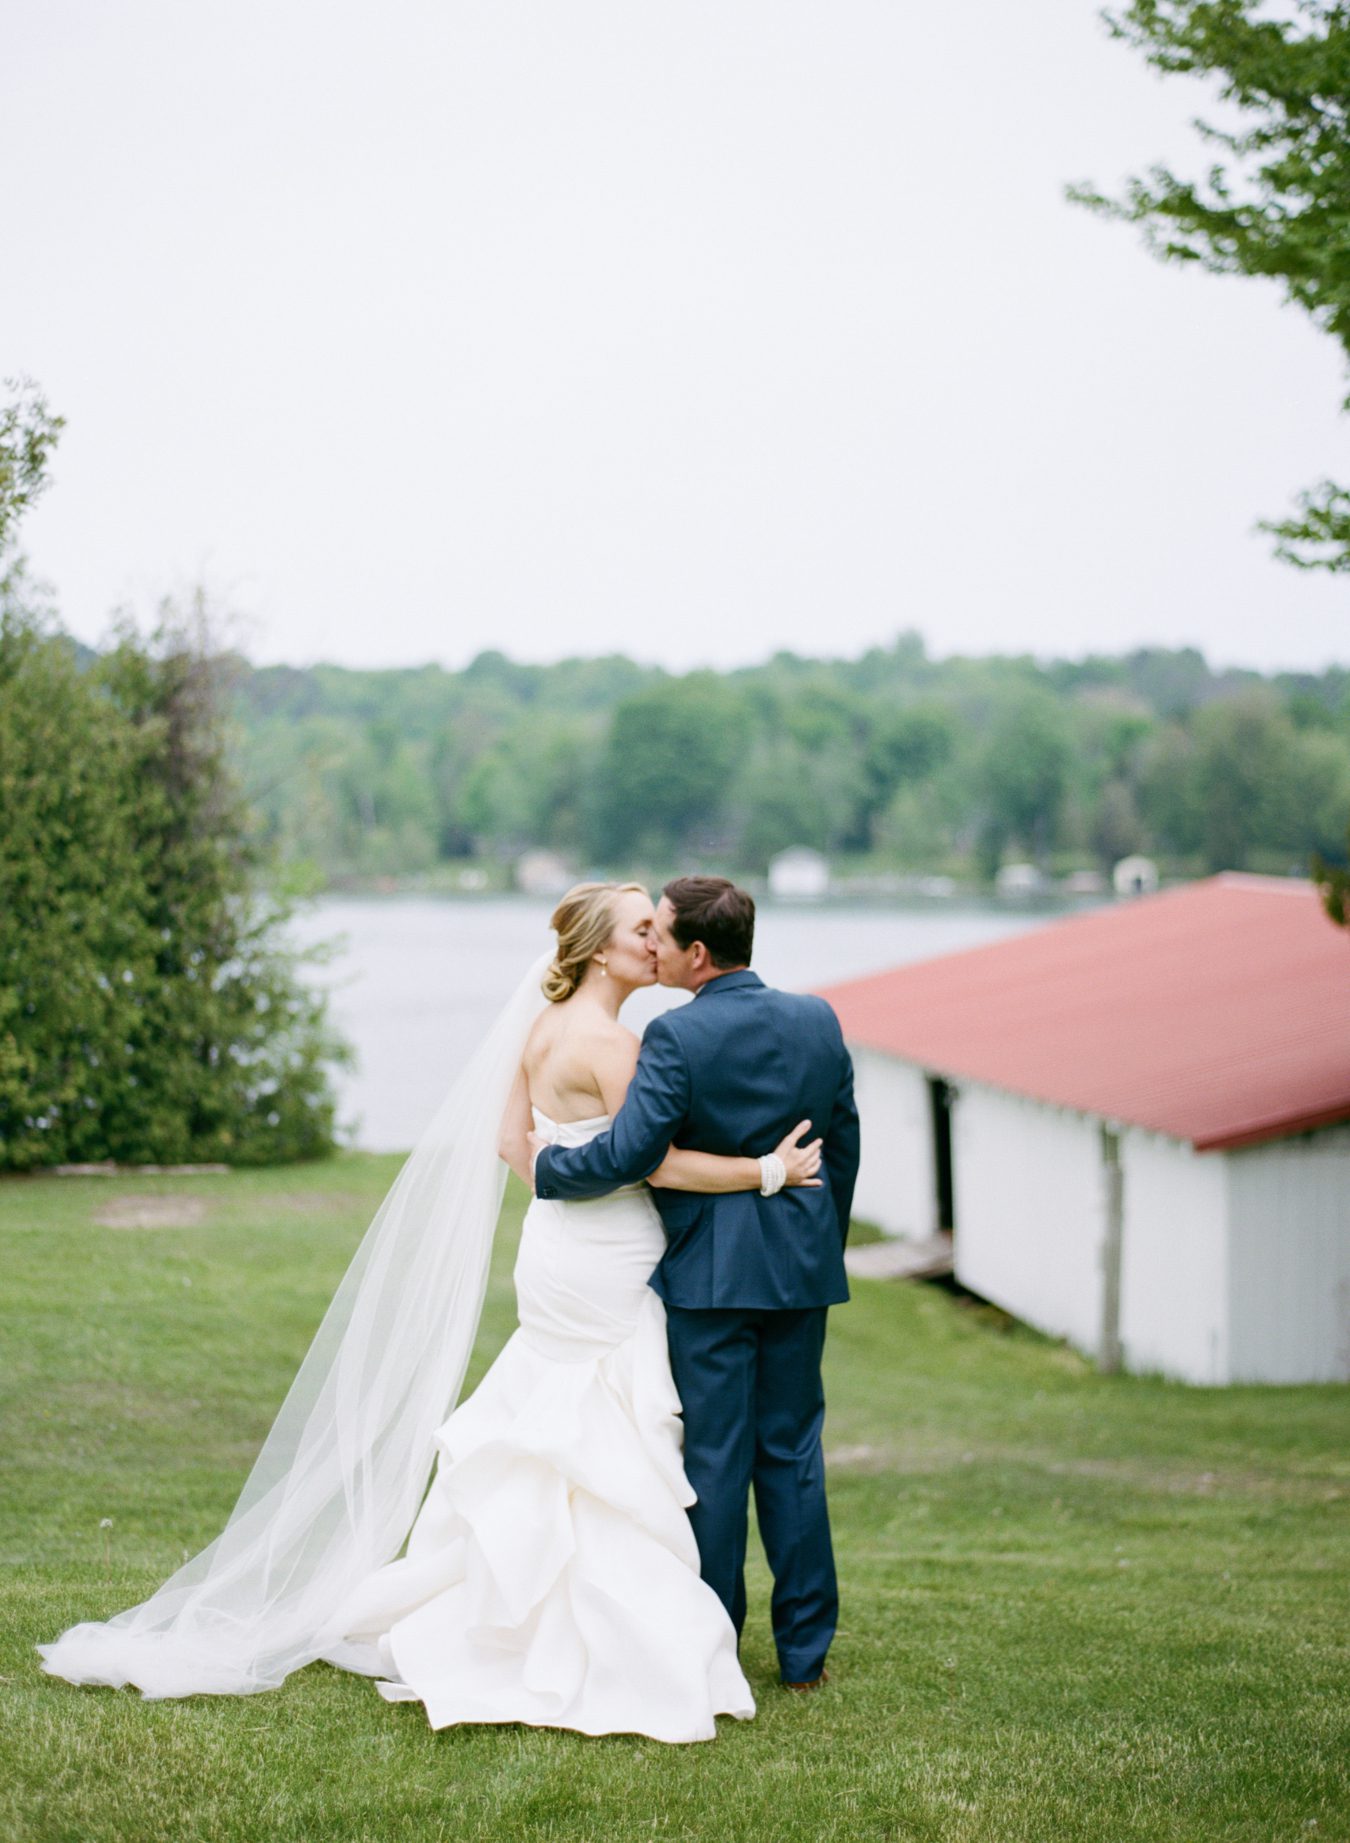 Cory Weber Photography | Sincerely Ginger Weddings | Fountain Point Resort | Fine Art Wedding Photography